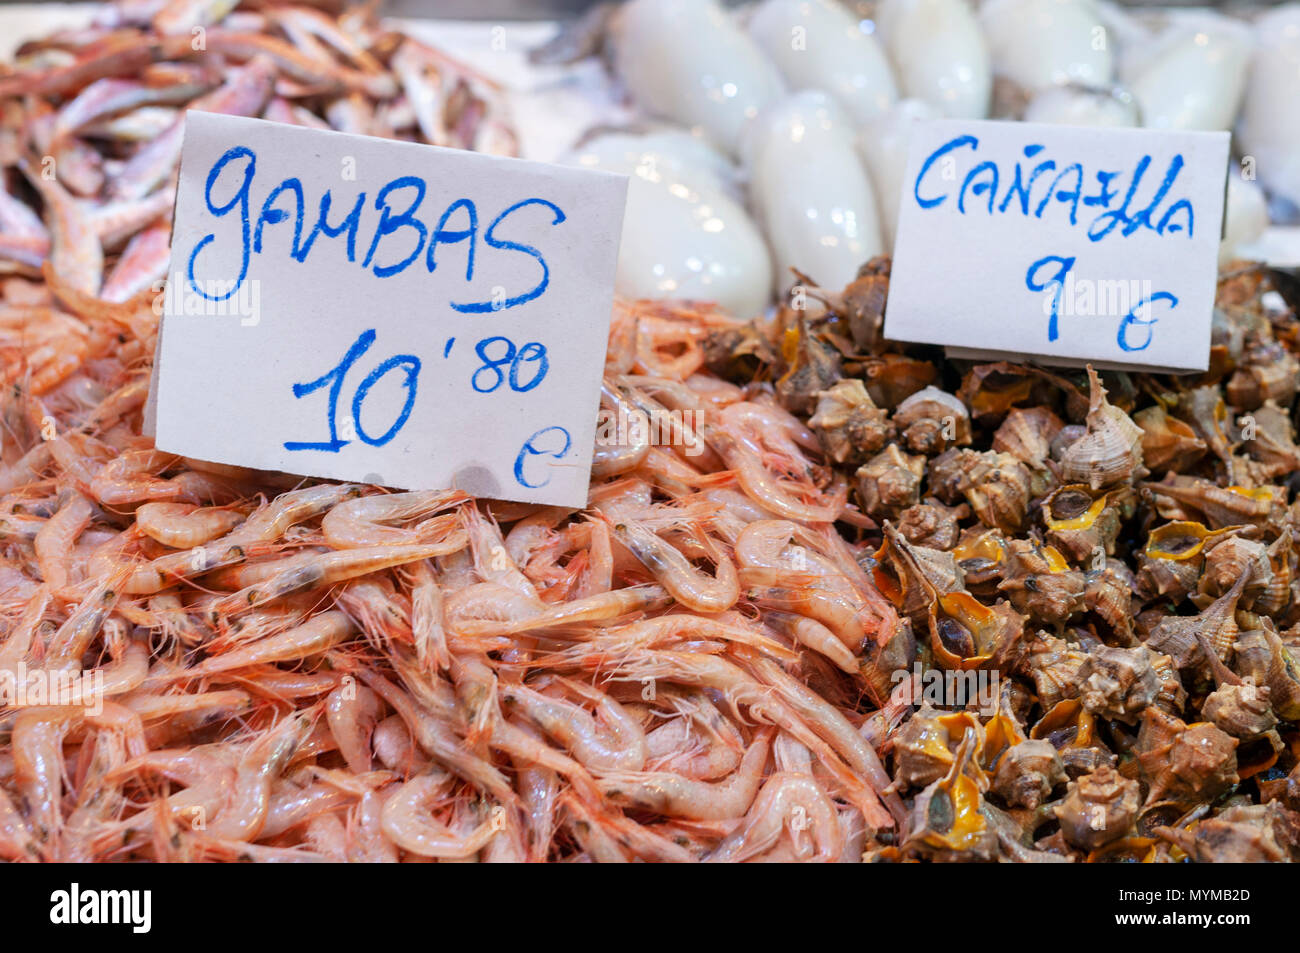 Fresh fish stall in a Spanish food market - gambas and canaella - shrimp and whelks Stock Photo